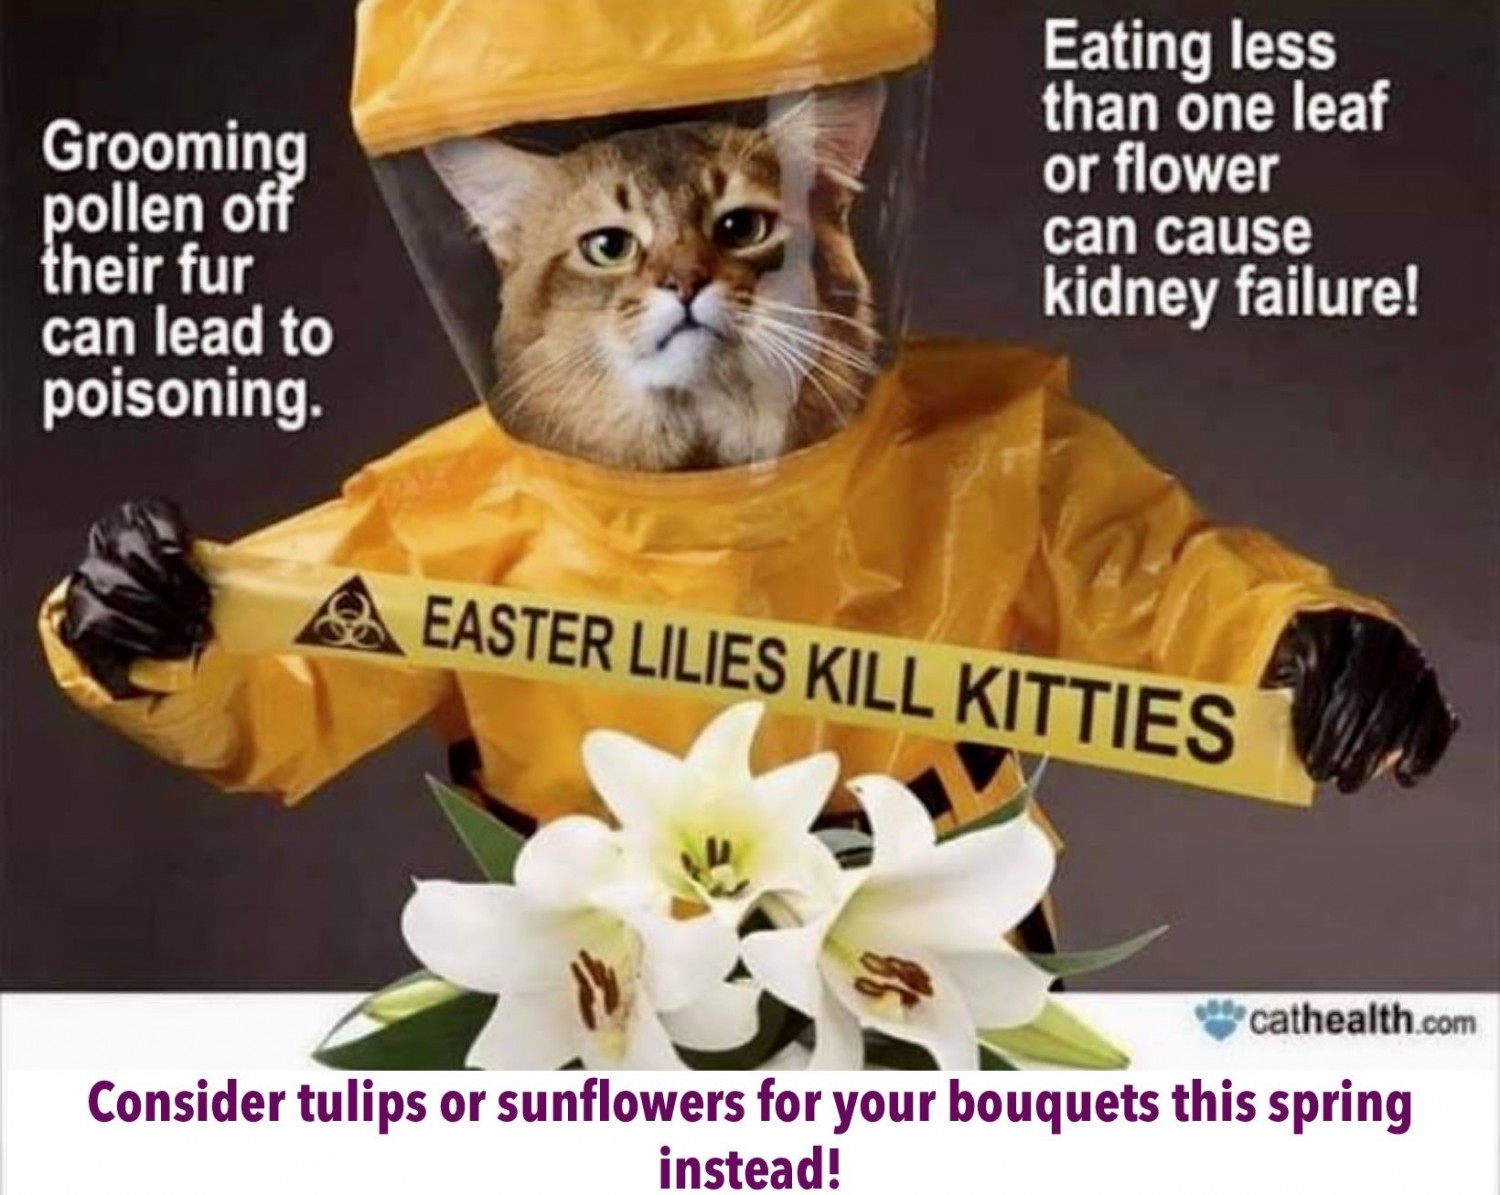 Lily toxin awareness post toxic to cats